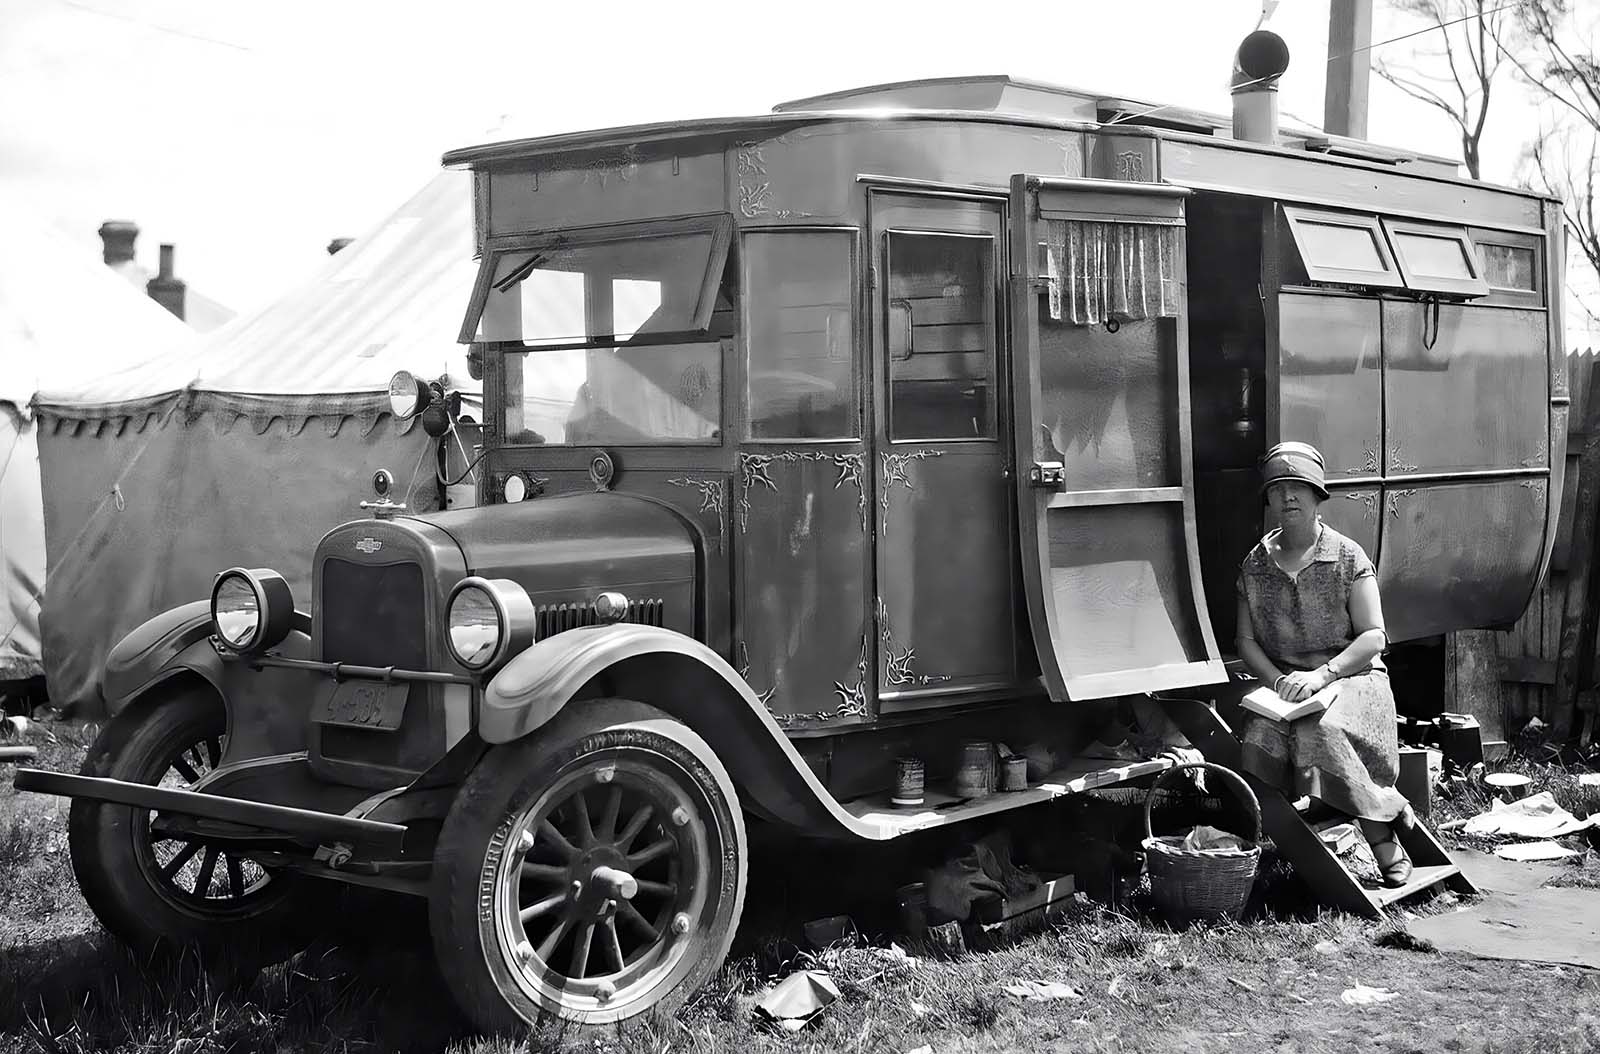 Vintage Wooden Homes on Wheels: Photos of Mobile Living from Early 20th Century